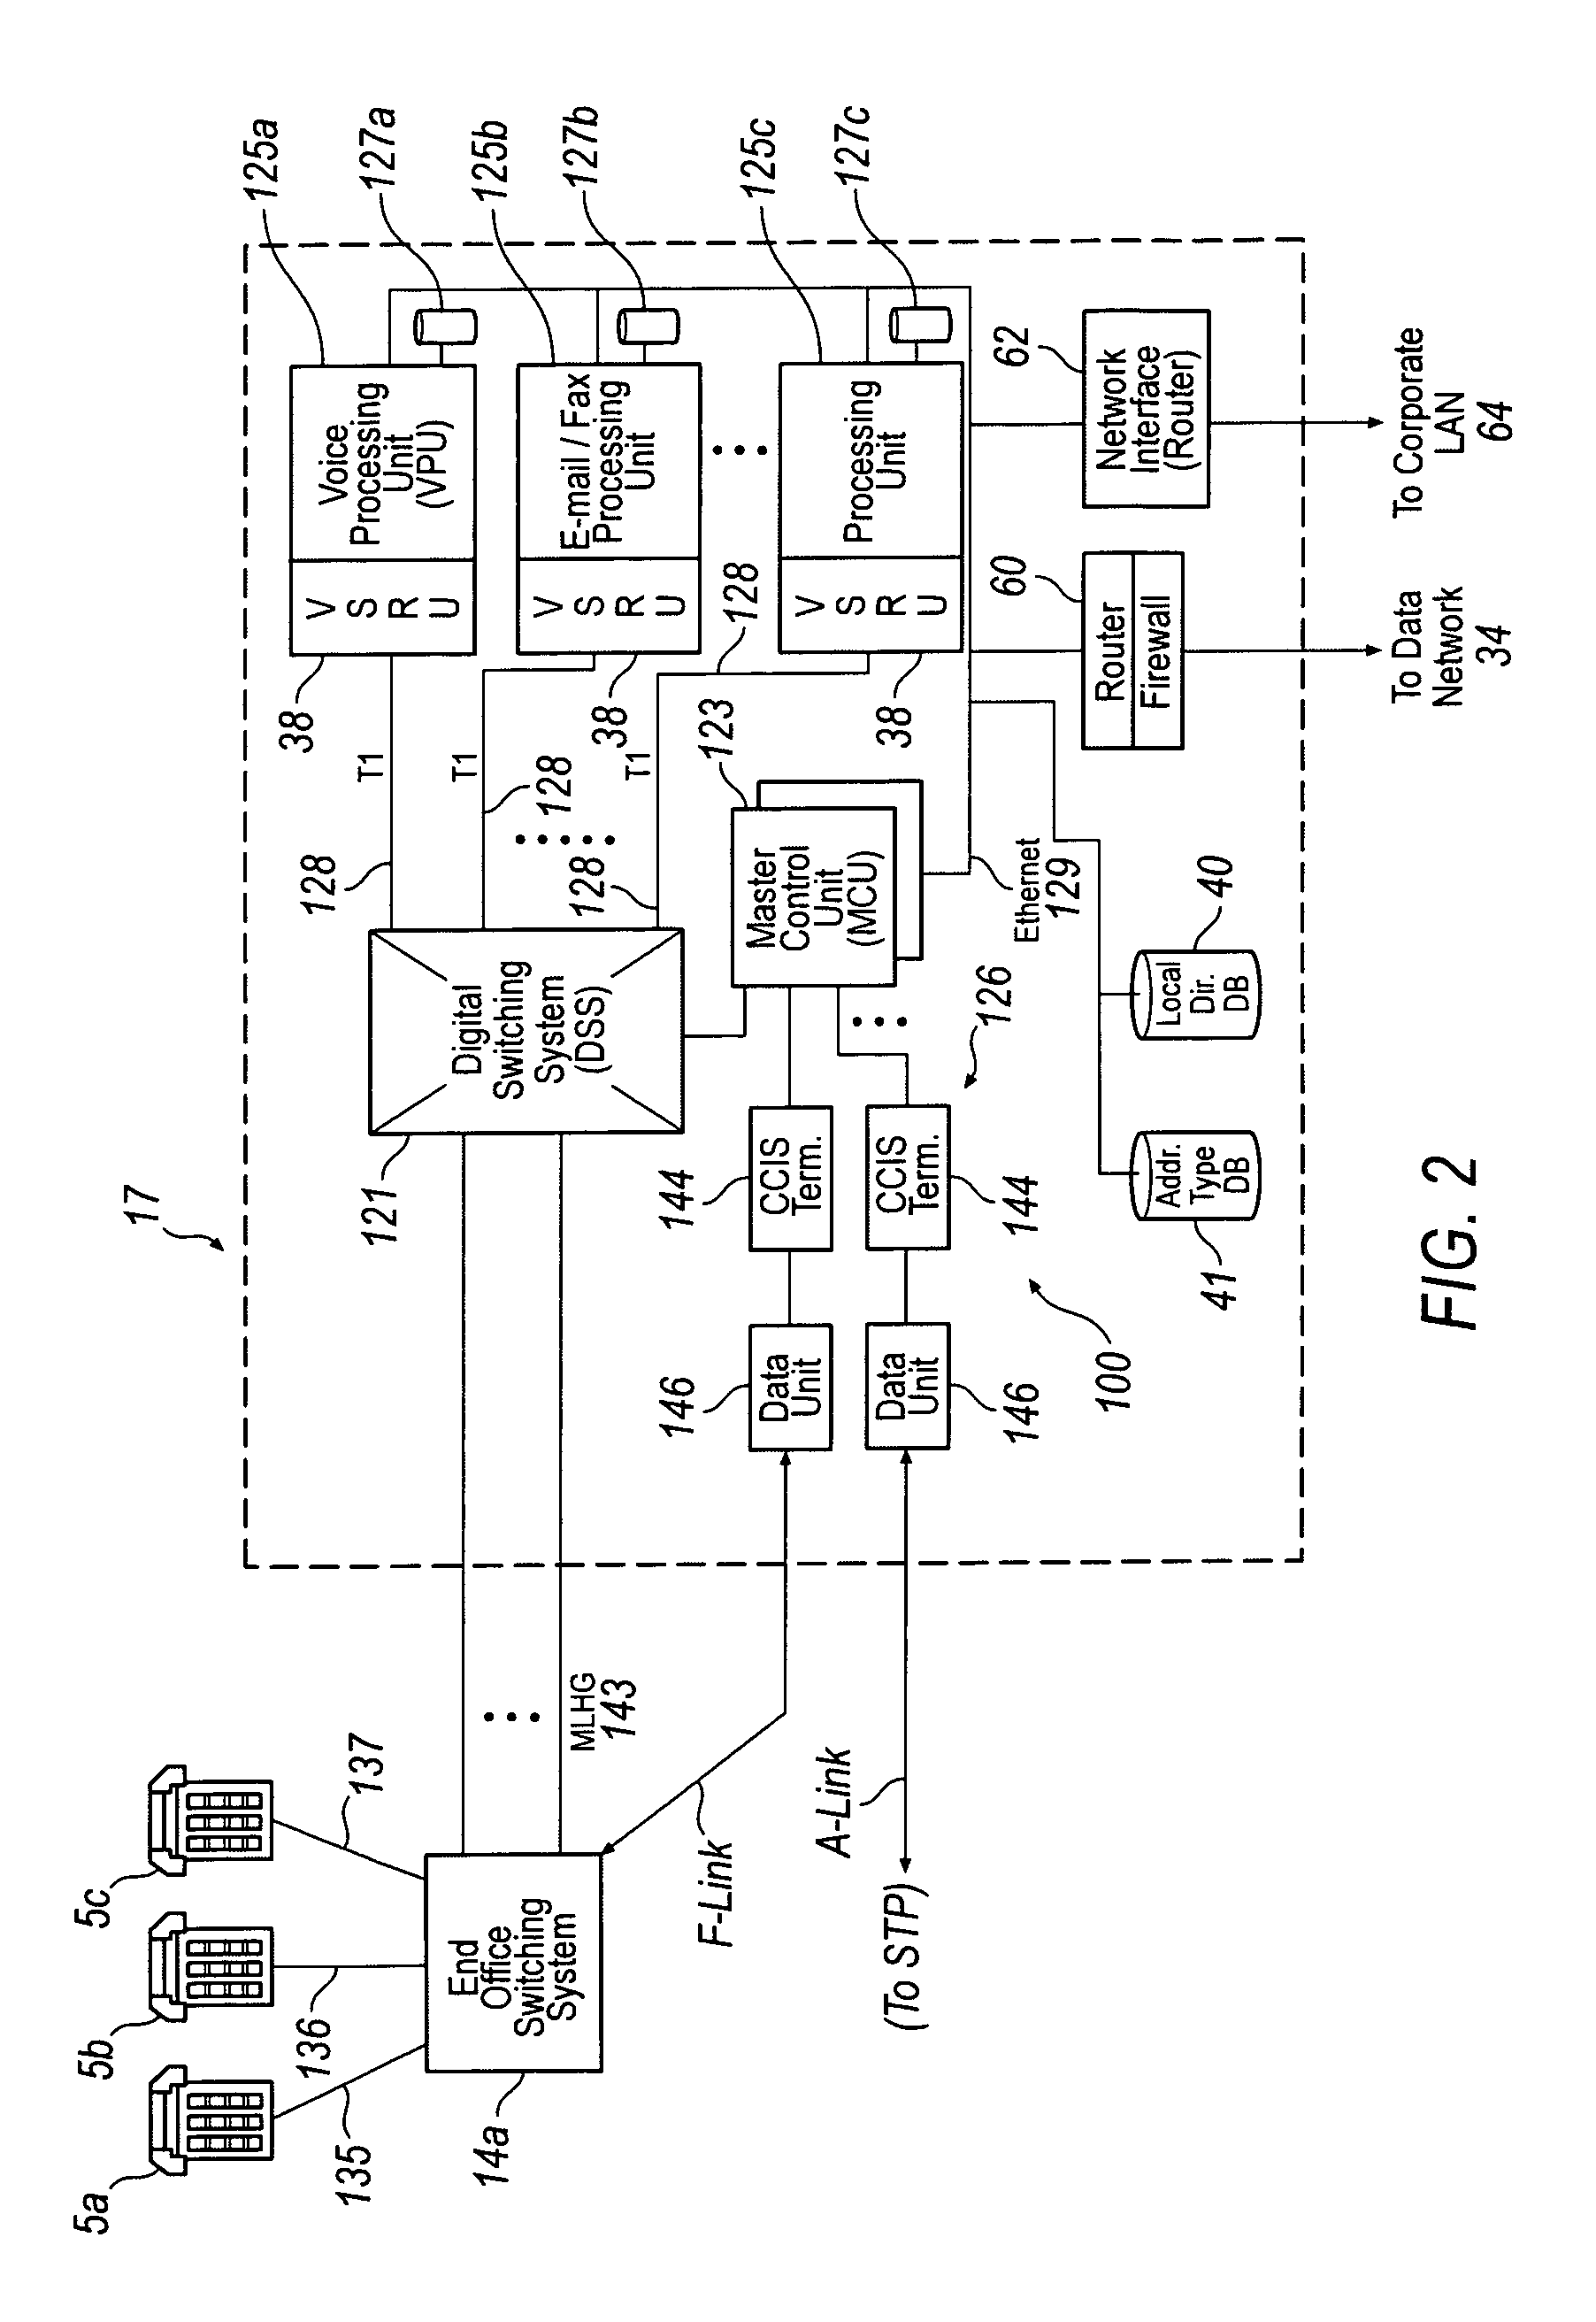 System for obtaining forwarding information for electronic system using speech recognition